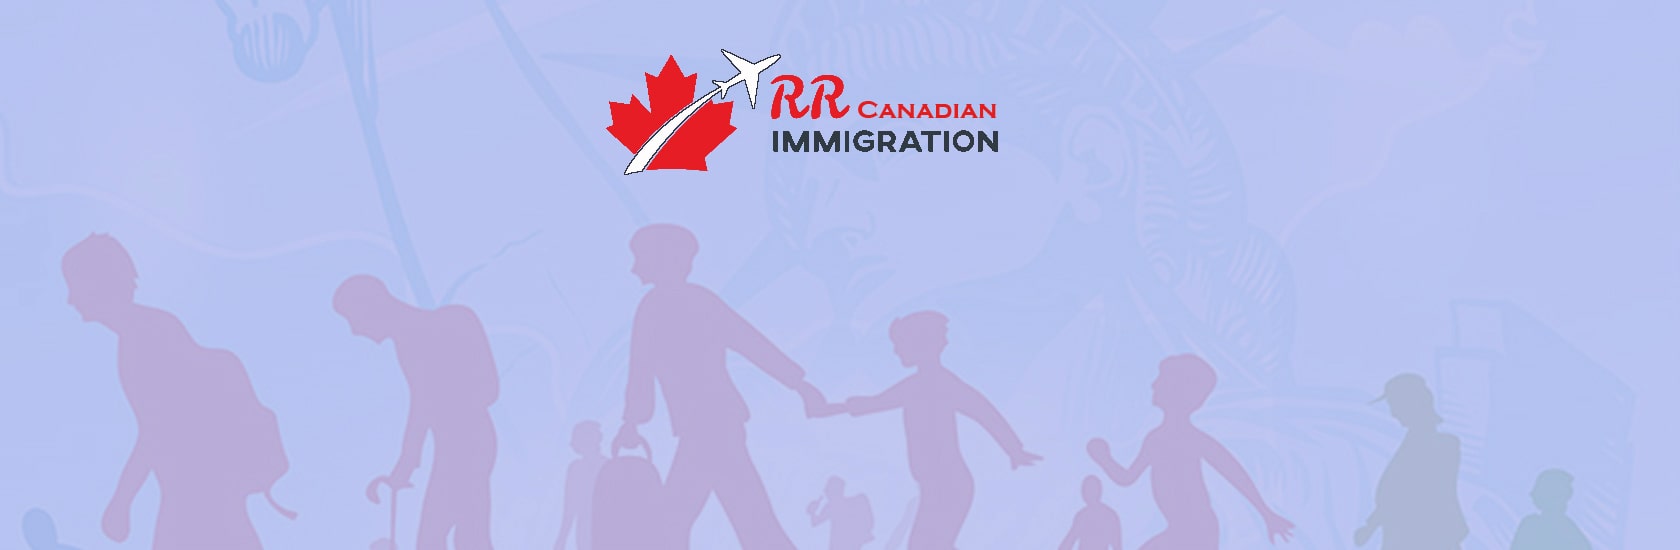 RR CANADIAN IMMIGRATION CONSULTANT SERVICES